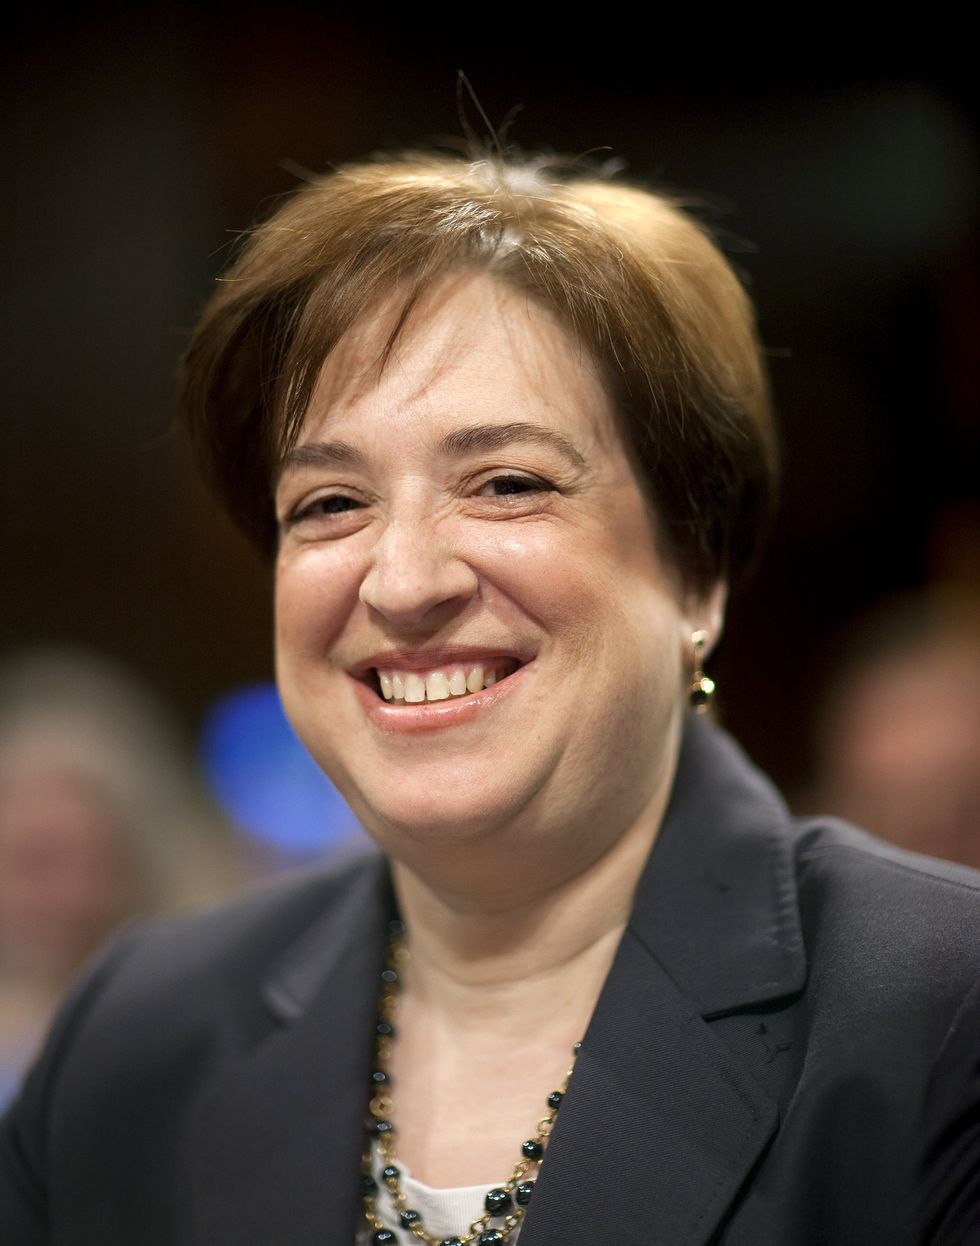 Gap-Toothed Grinners: Elena Kagan, nominee for the U.S. Supreme Court, arrives for the second day of her confirmation hearing by the Senate Judiciary Committee in Washington, D.C., U.S., on Tuesday, June 29, 2010. Kagan told senators that the framers of the U.S. Constitution anticipated it would be interpreted in light of changes in society, technology and the country at large. Photographer: Joshua Roberts/Bloomberg via Getty Images *** Local Caption *** Elena Kagan